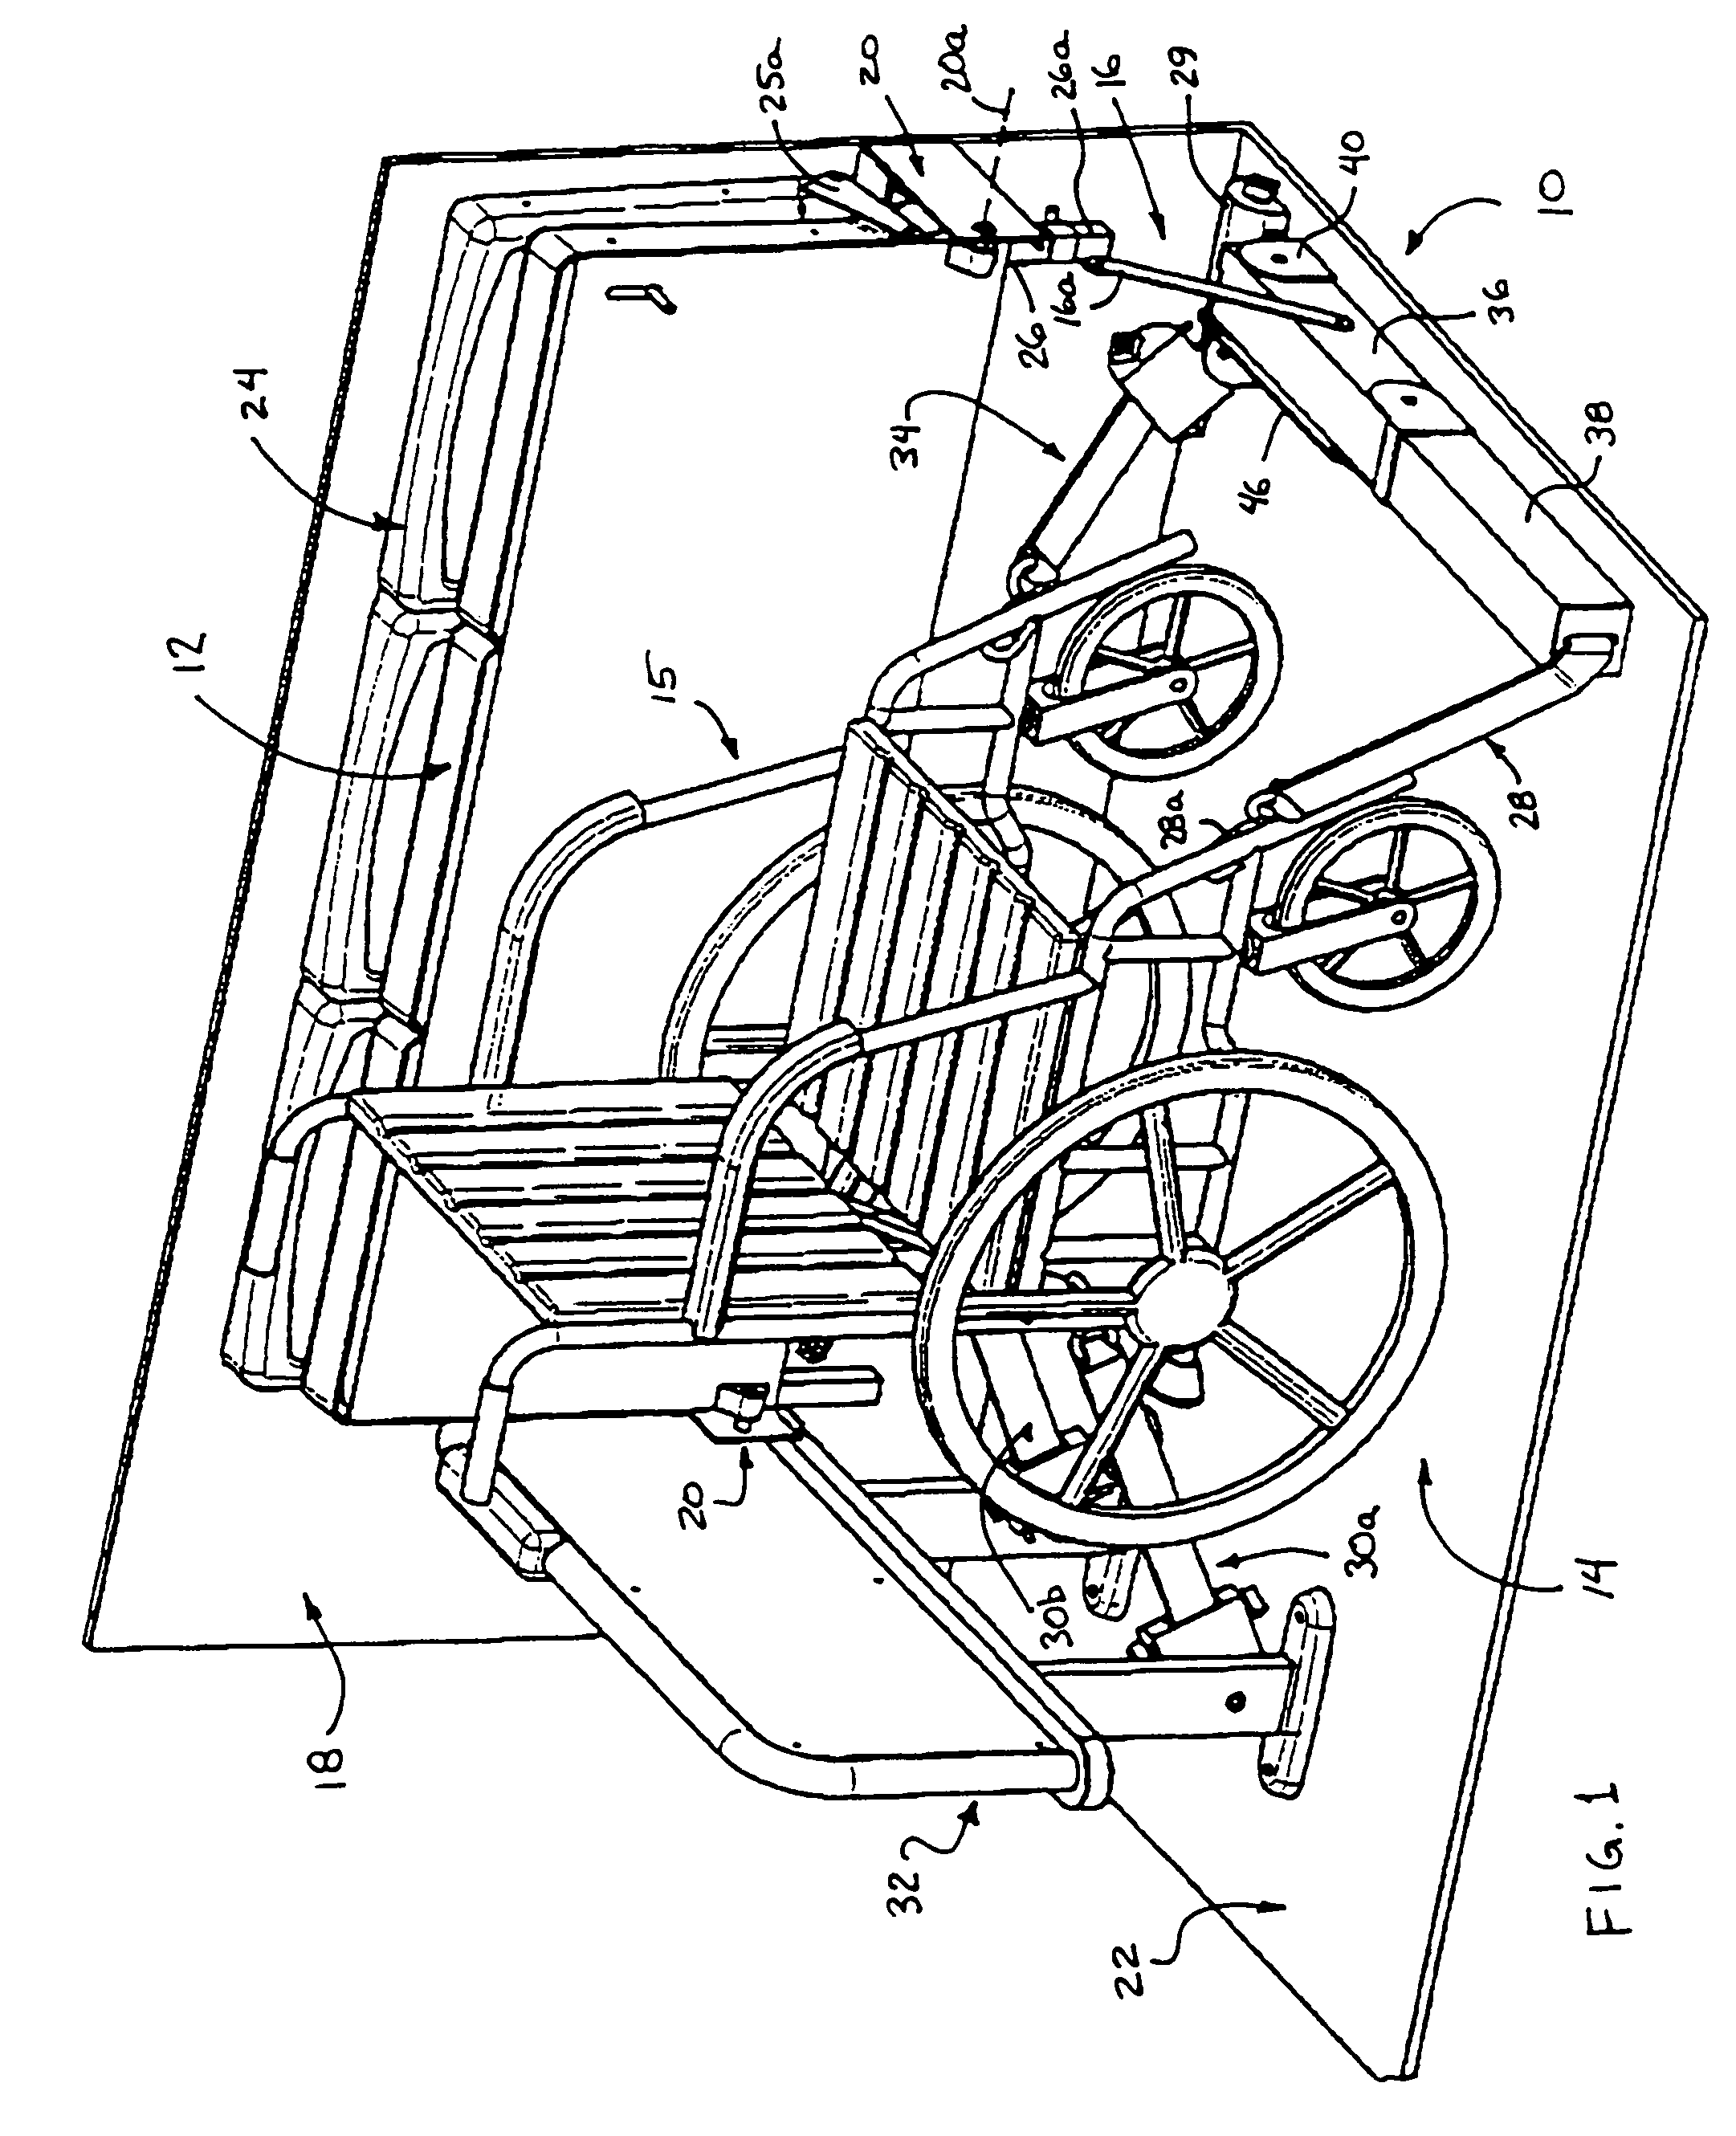 Wheelchair holding device